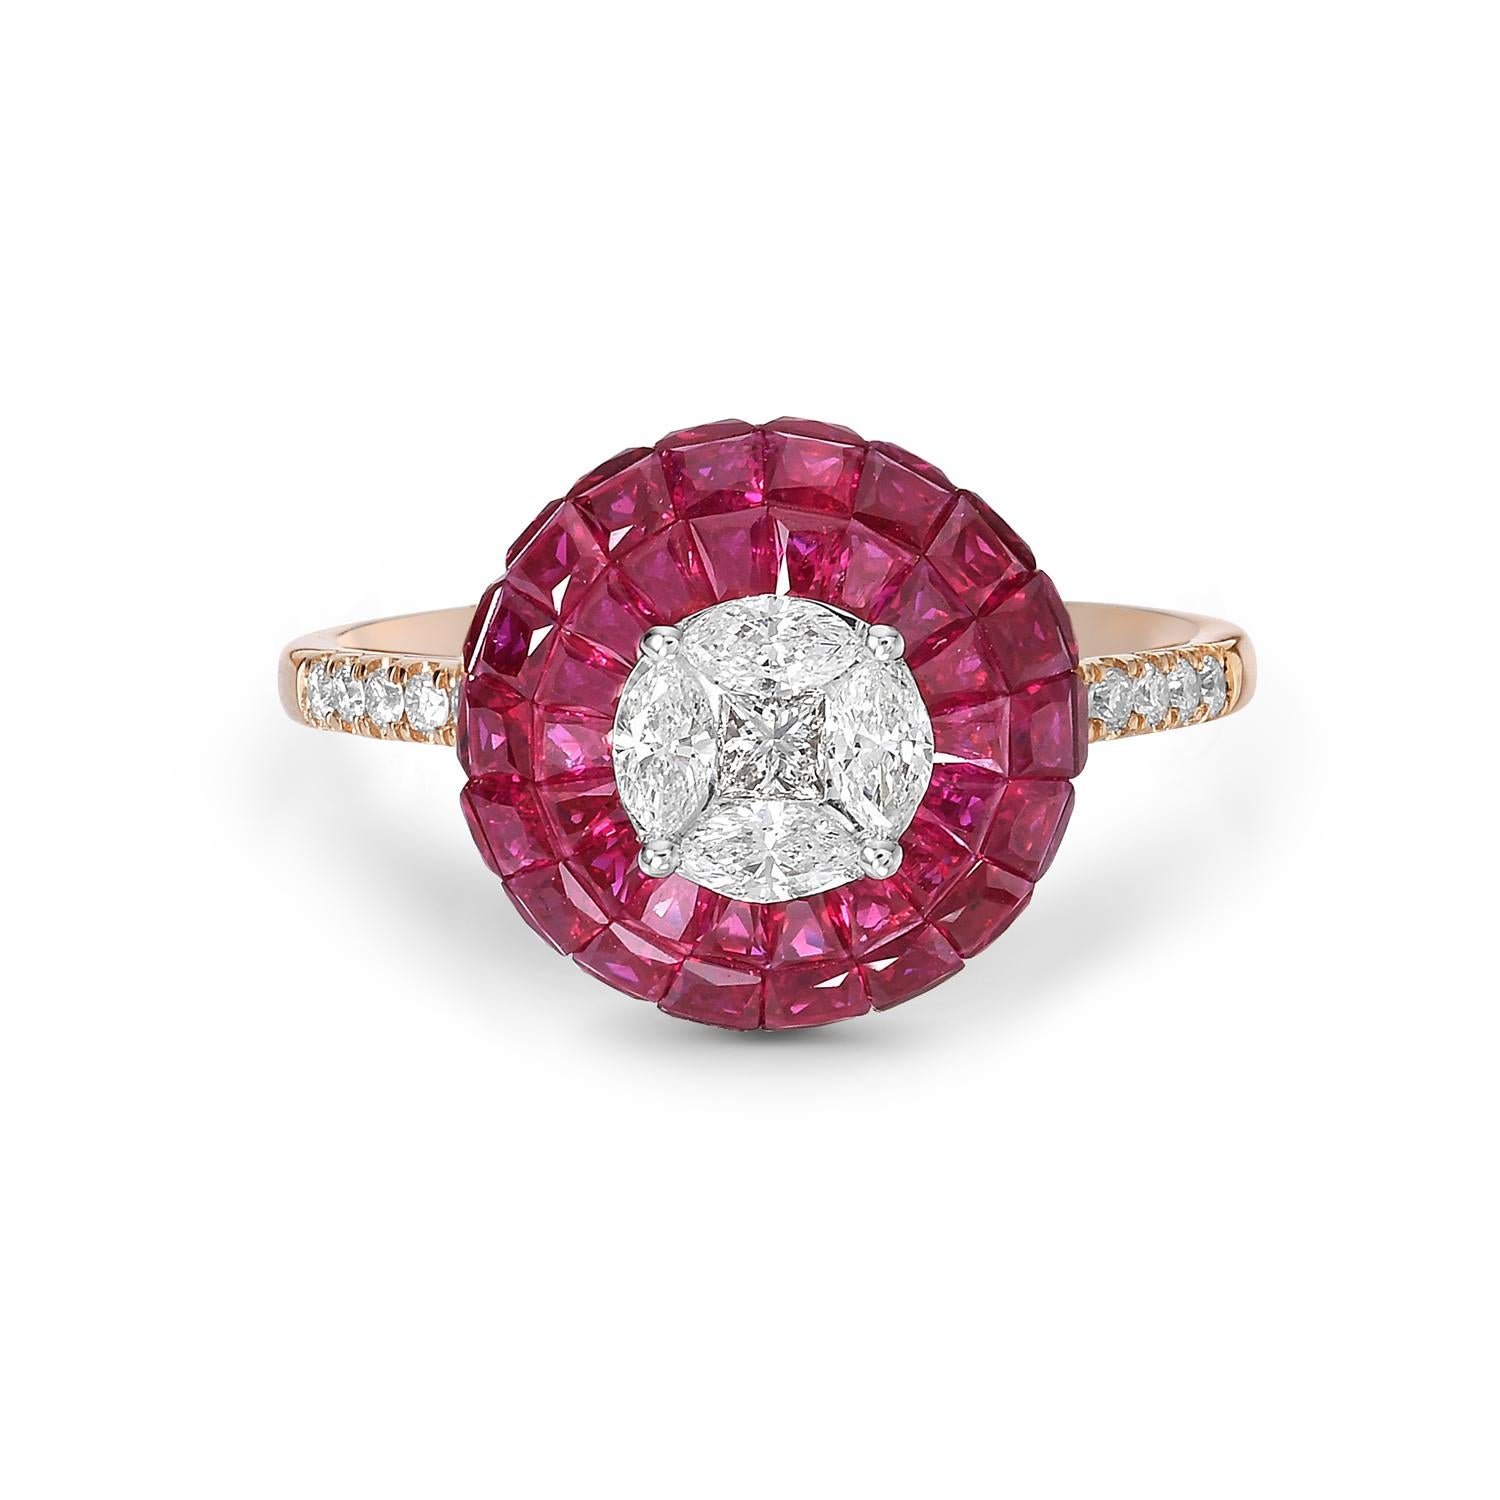 Mixed Cut 4.43 Ct European Cut Ruby Cocktail Ring With Diamonds In 18k Gold For Sale